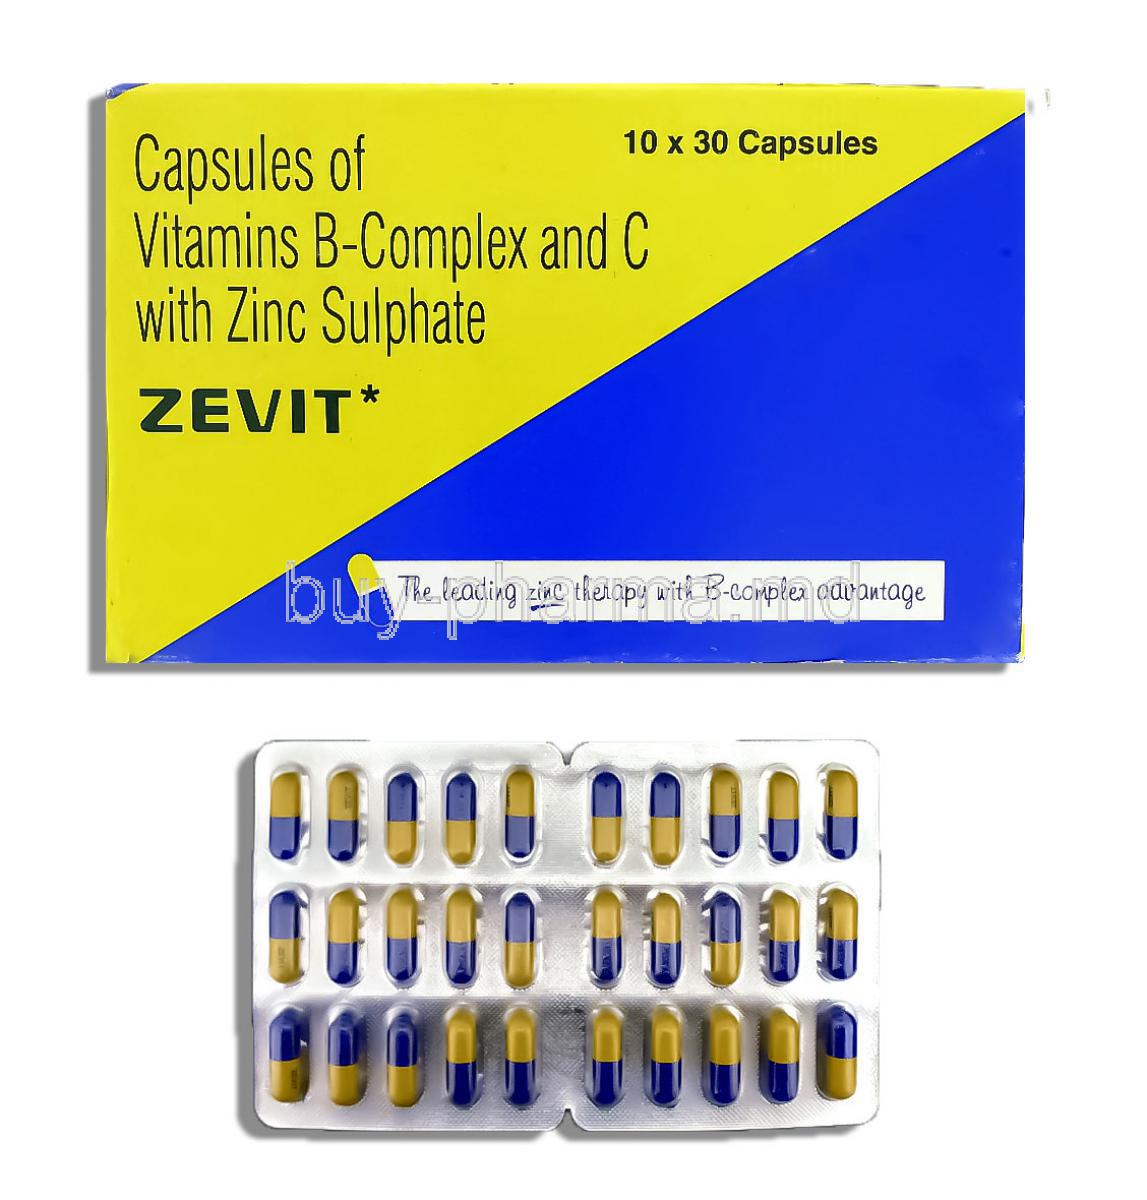 Zevit, Vitamins B-Complex and C with Zinc Sulphate